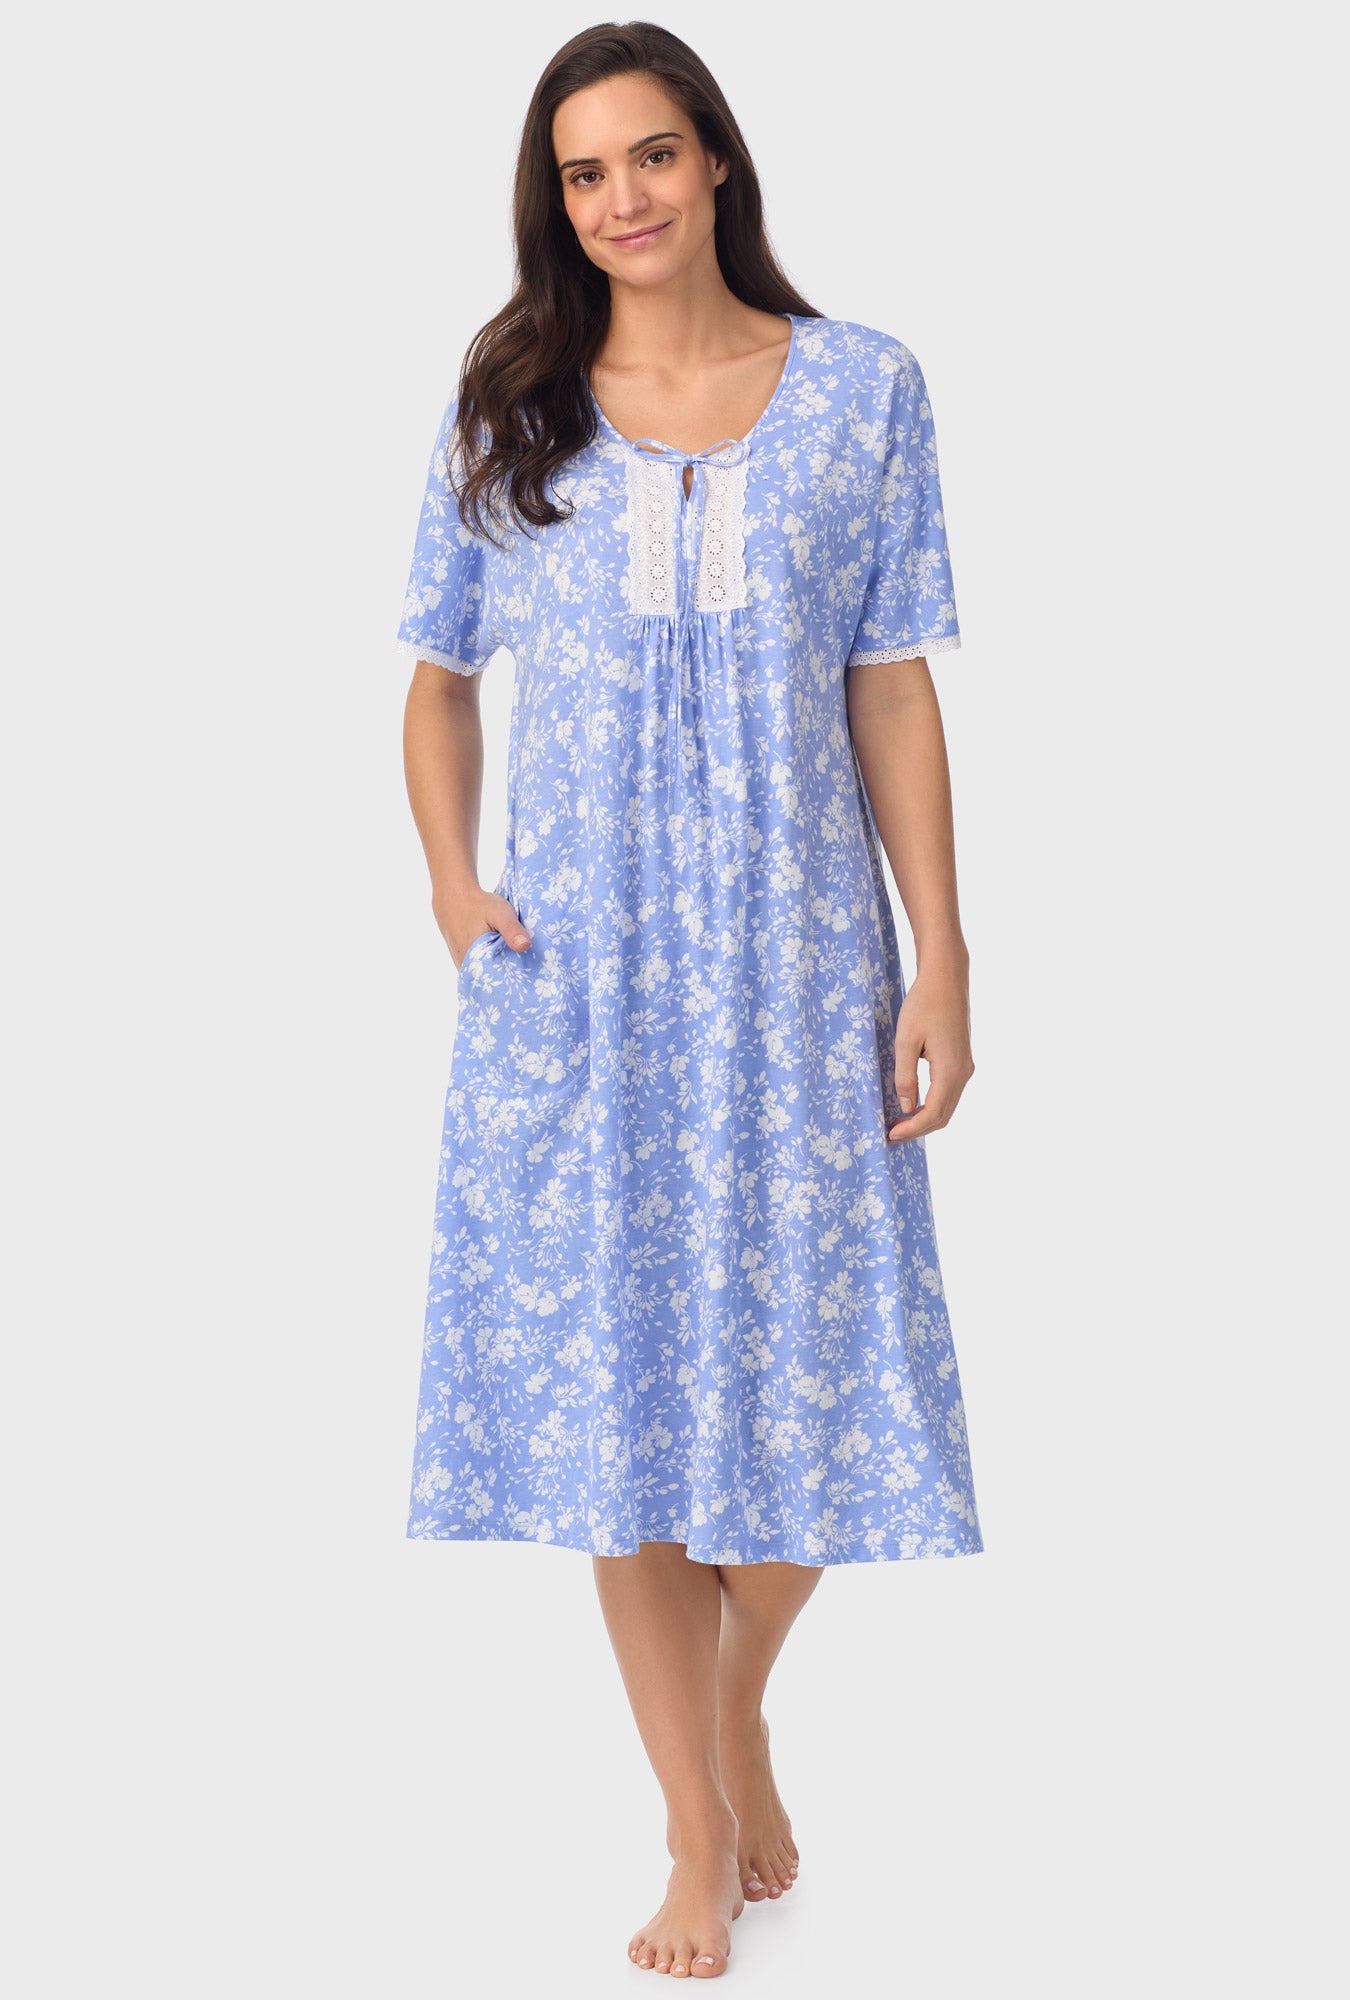 A lady wearing blue Long Sleeve Floral Caftan  with Powder Blue print